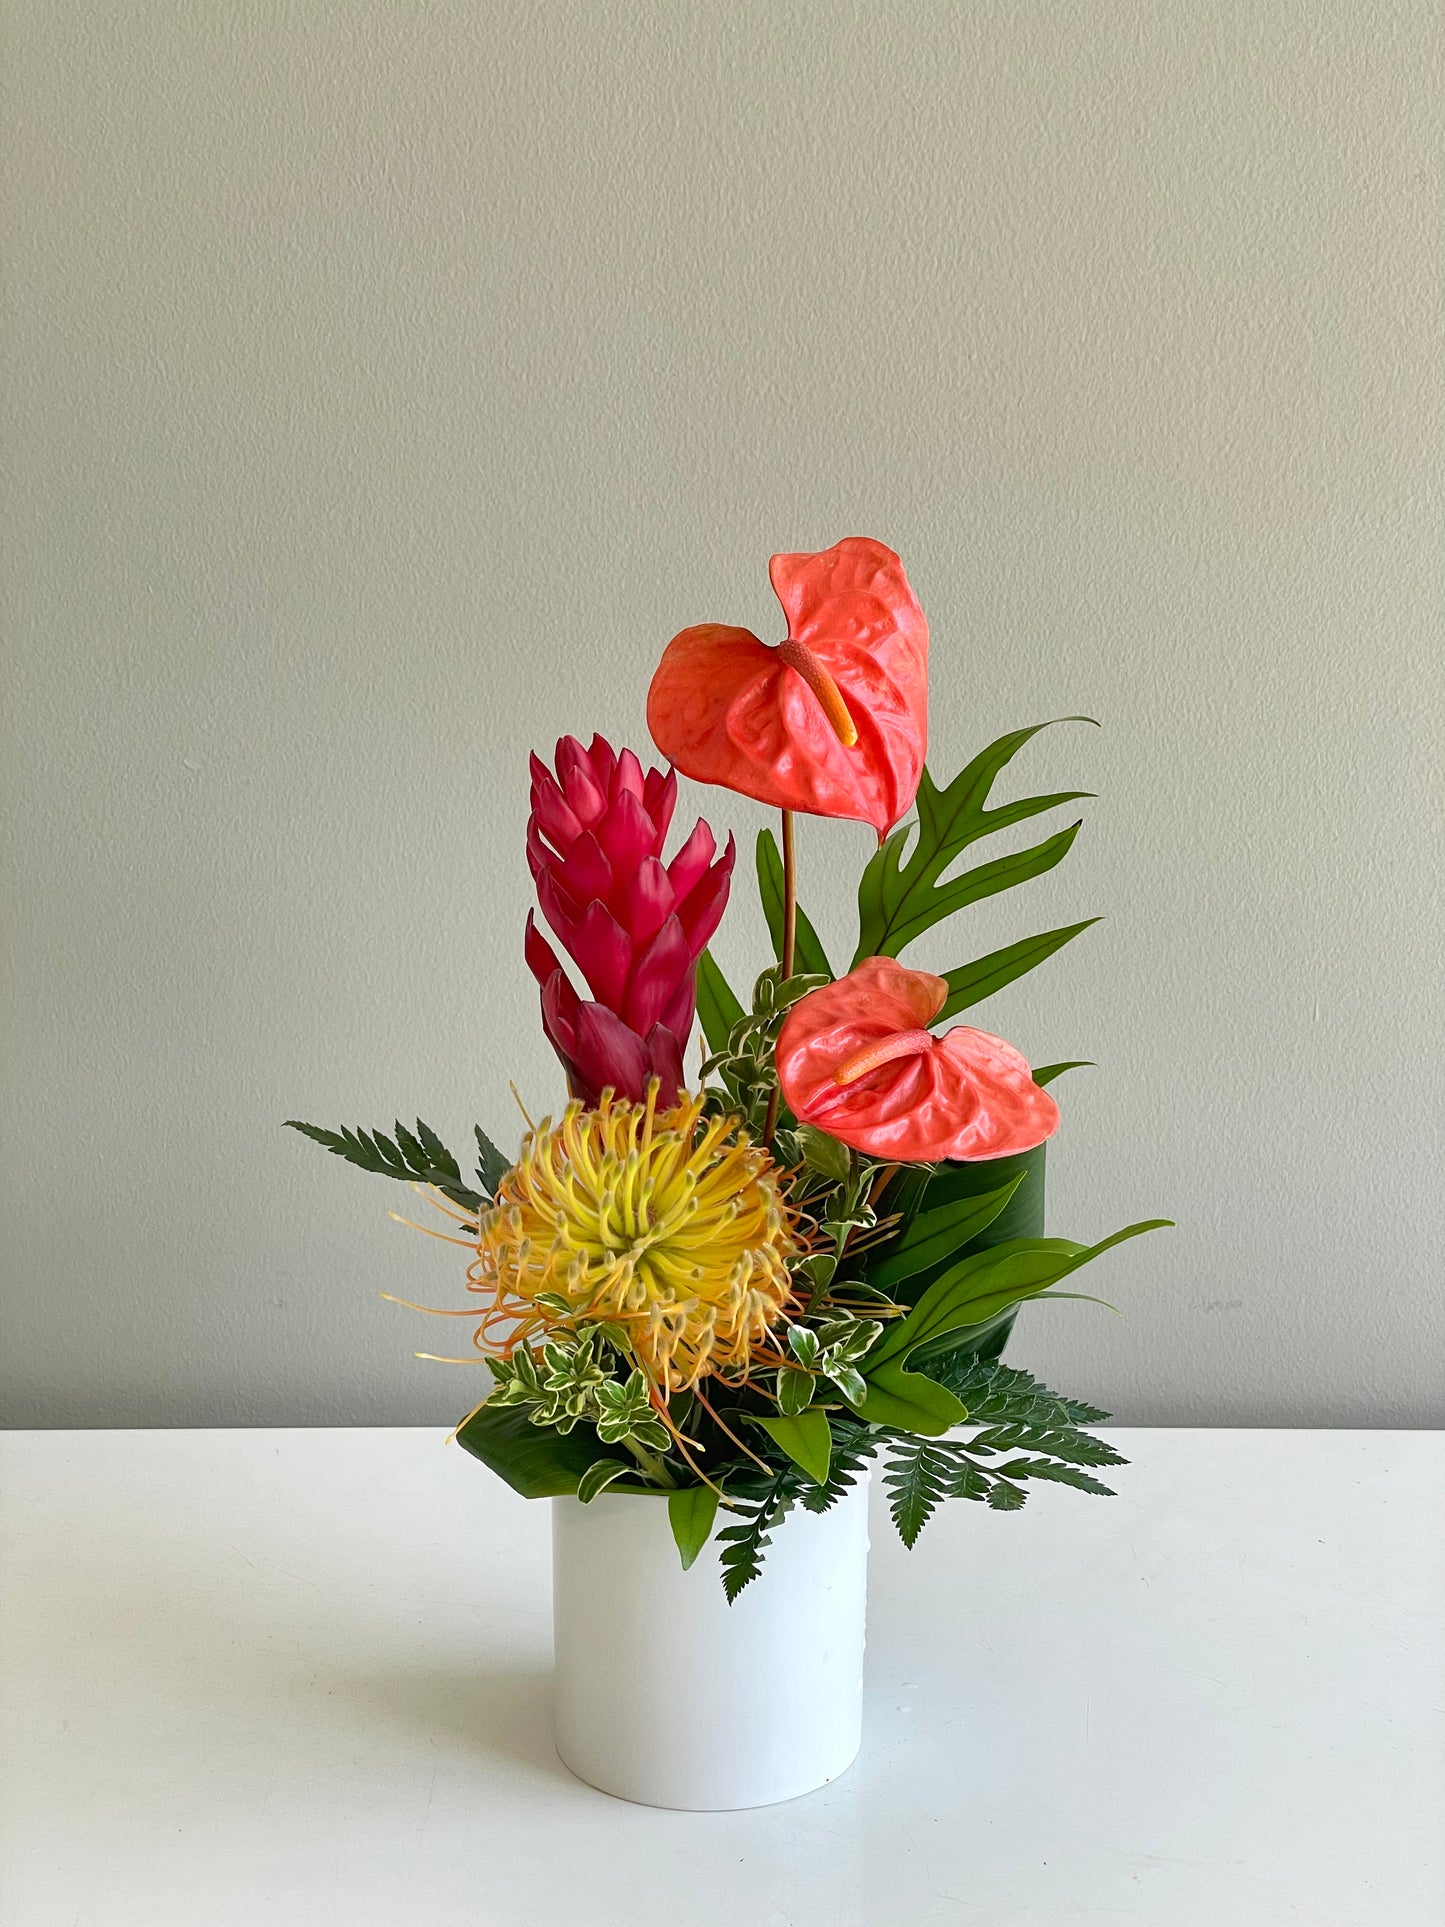 Upgrade 1-to-3 Bottle Purchase to a Small Seasonal Flower Arrangement